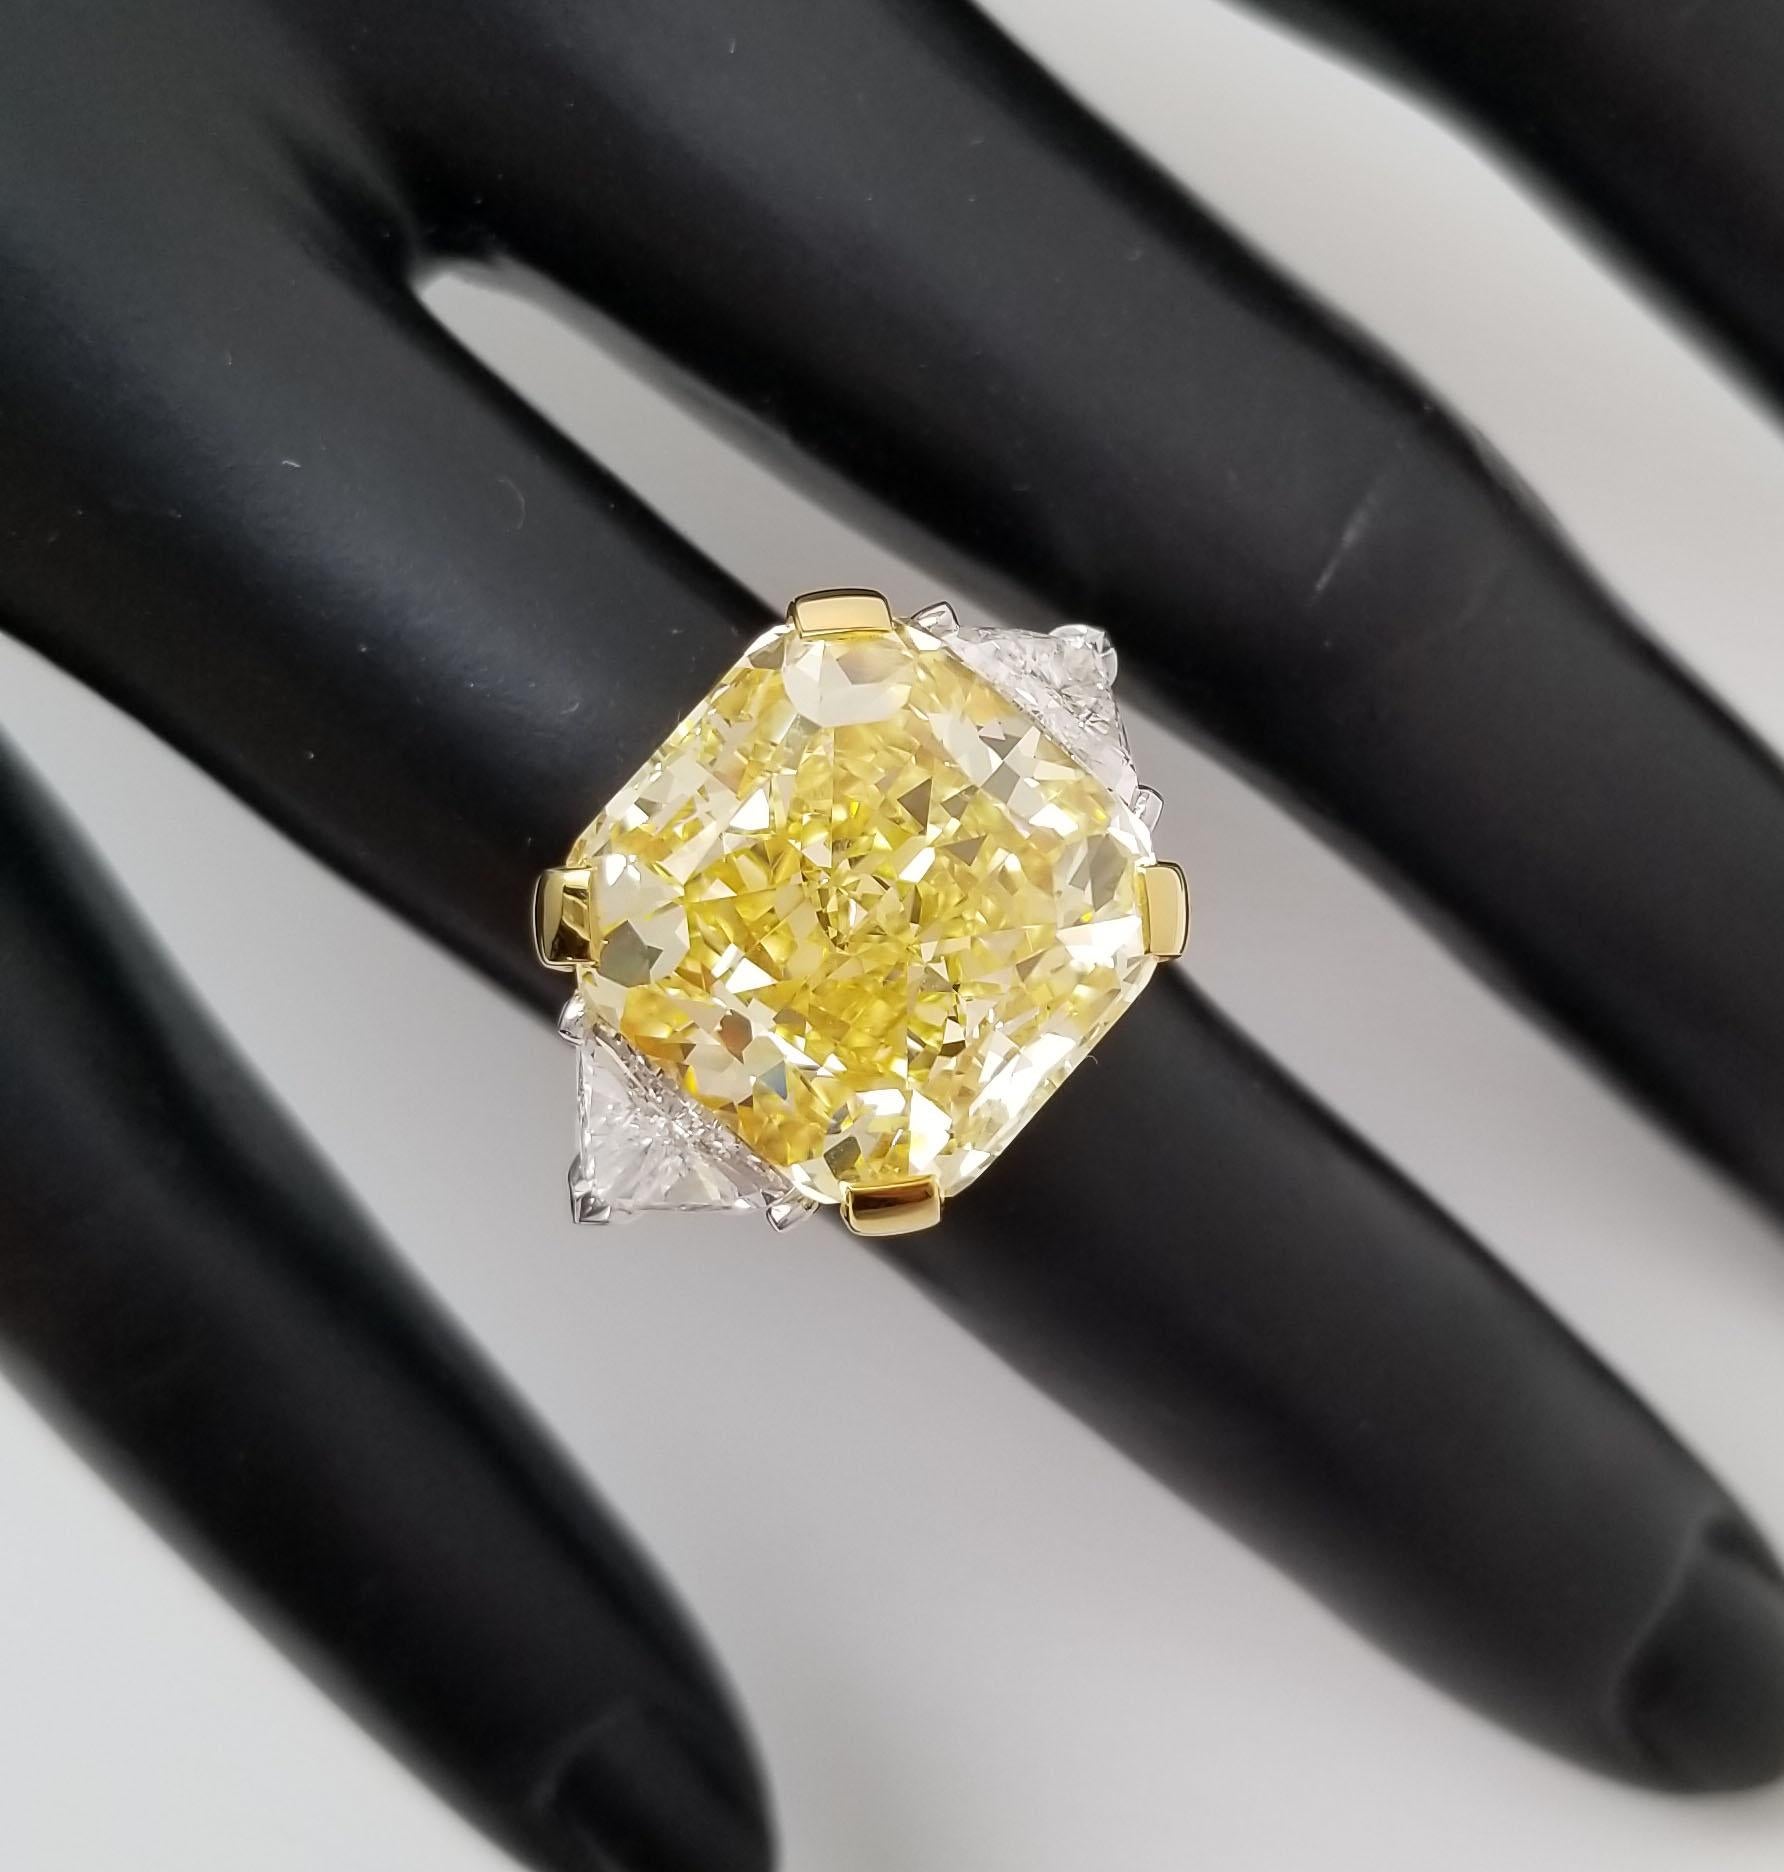 20 Ct Fancy Intense Yellow Diamond GIA Radiant Cut Three Stone Engagement Ring For Sale 1